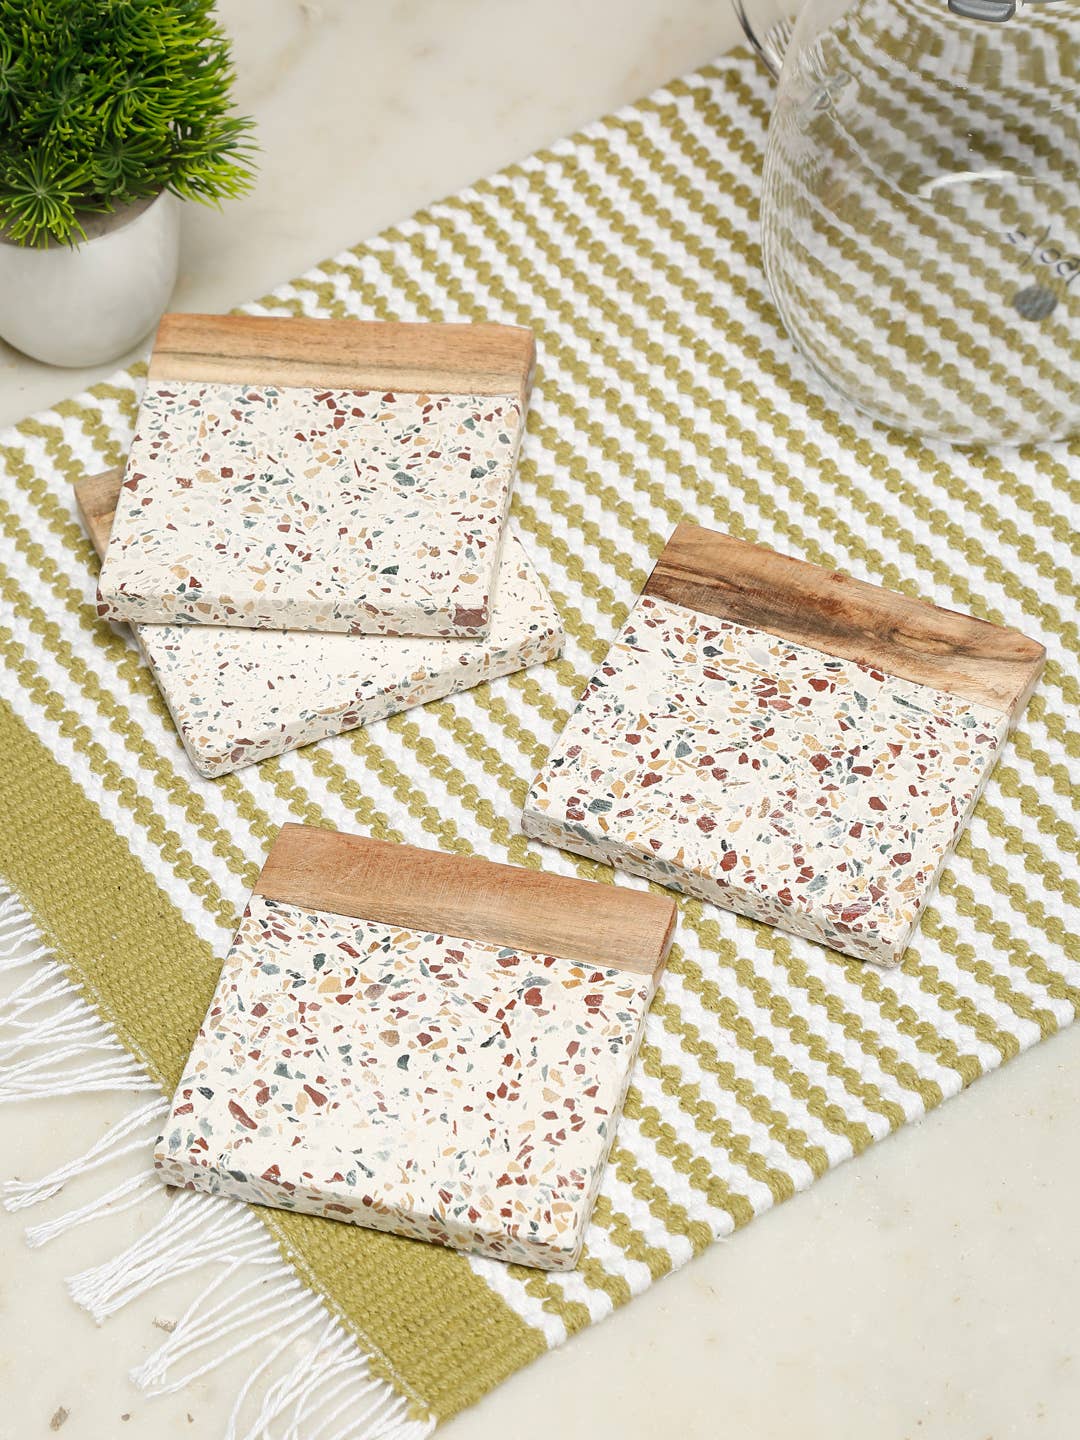 Eyda Homes - Terrazzo Marble Coasters: Stylish Protection for Table